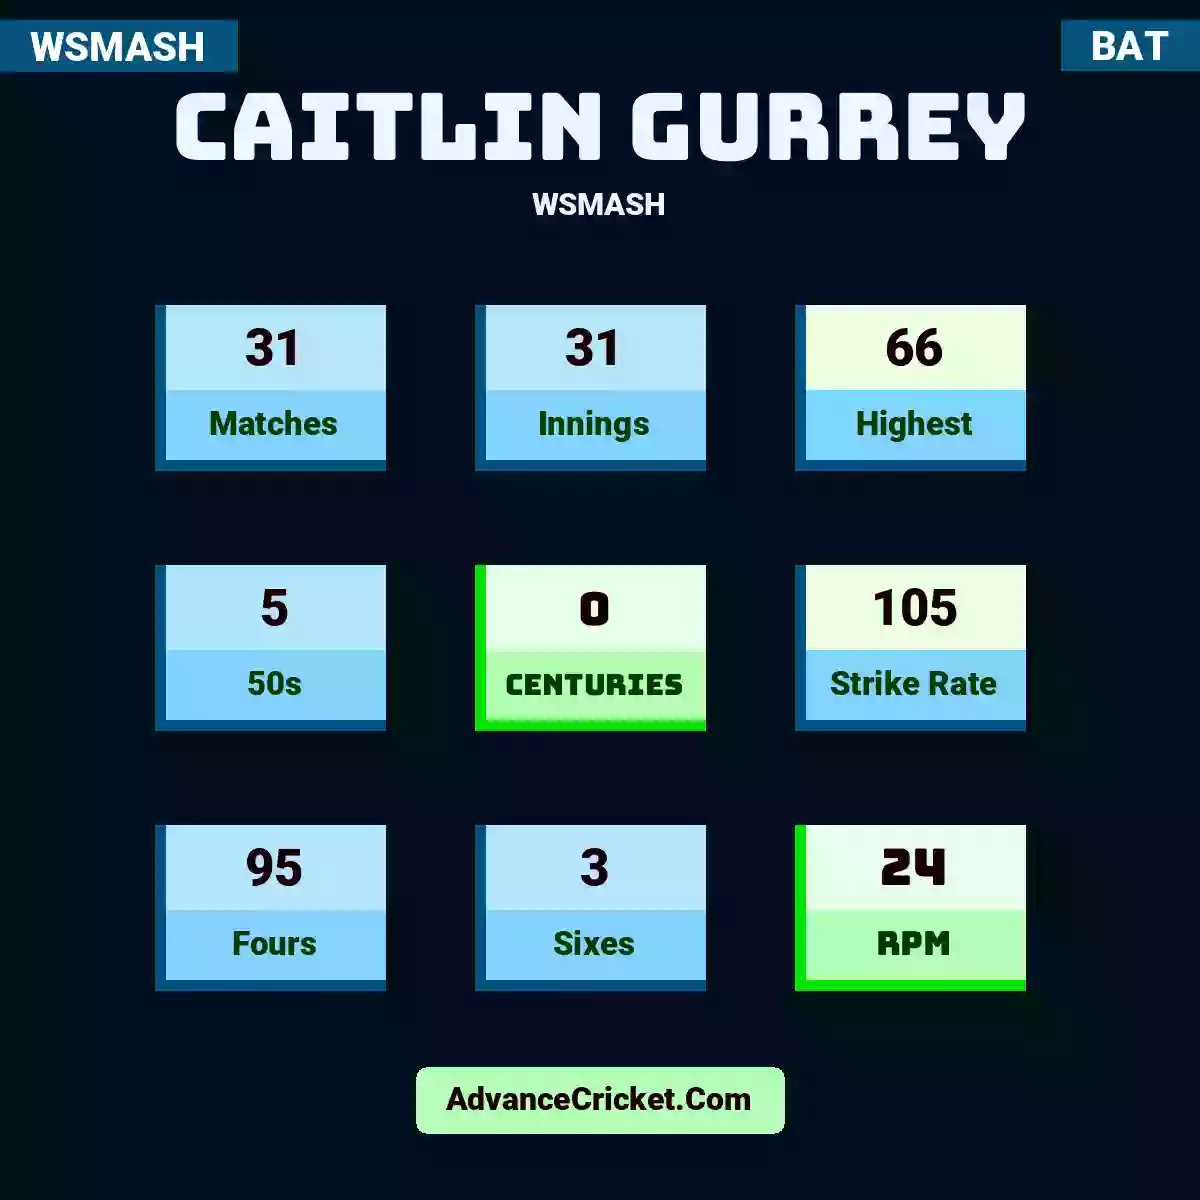 Caitlin Gurrey WSMASH , Caitlin Gurrey played 31 matches, scored 66 runs as highest, 5 half-centuries, and 0 centuries, with a strike rate of 105. C.Gurrey hit 95 fours and 3 sixes, with an RPM of 24.